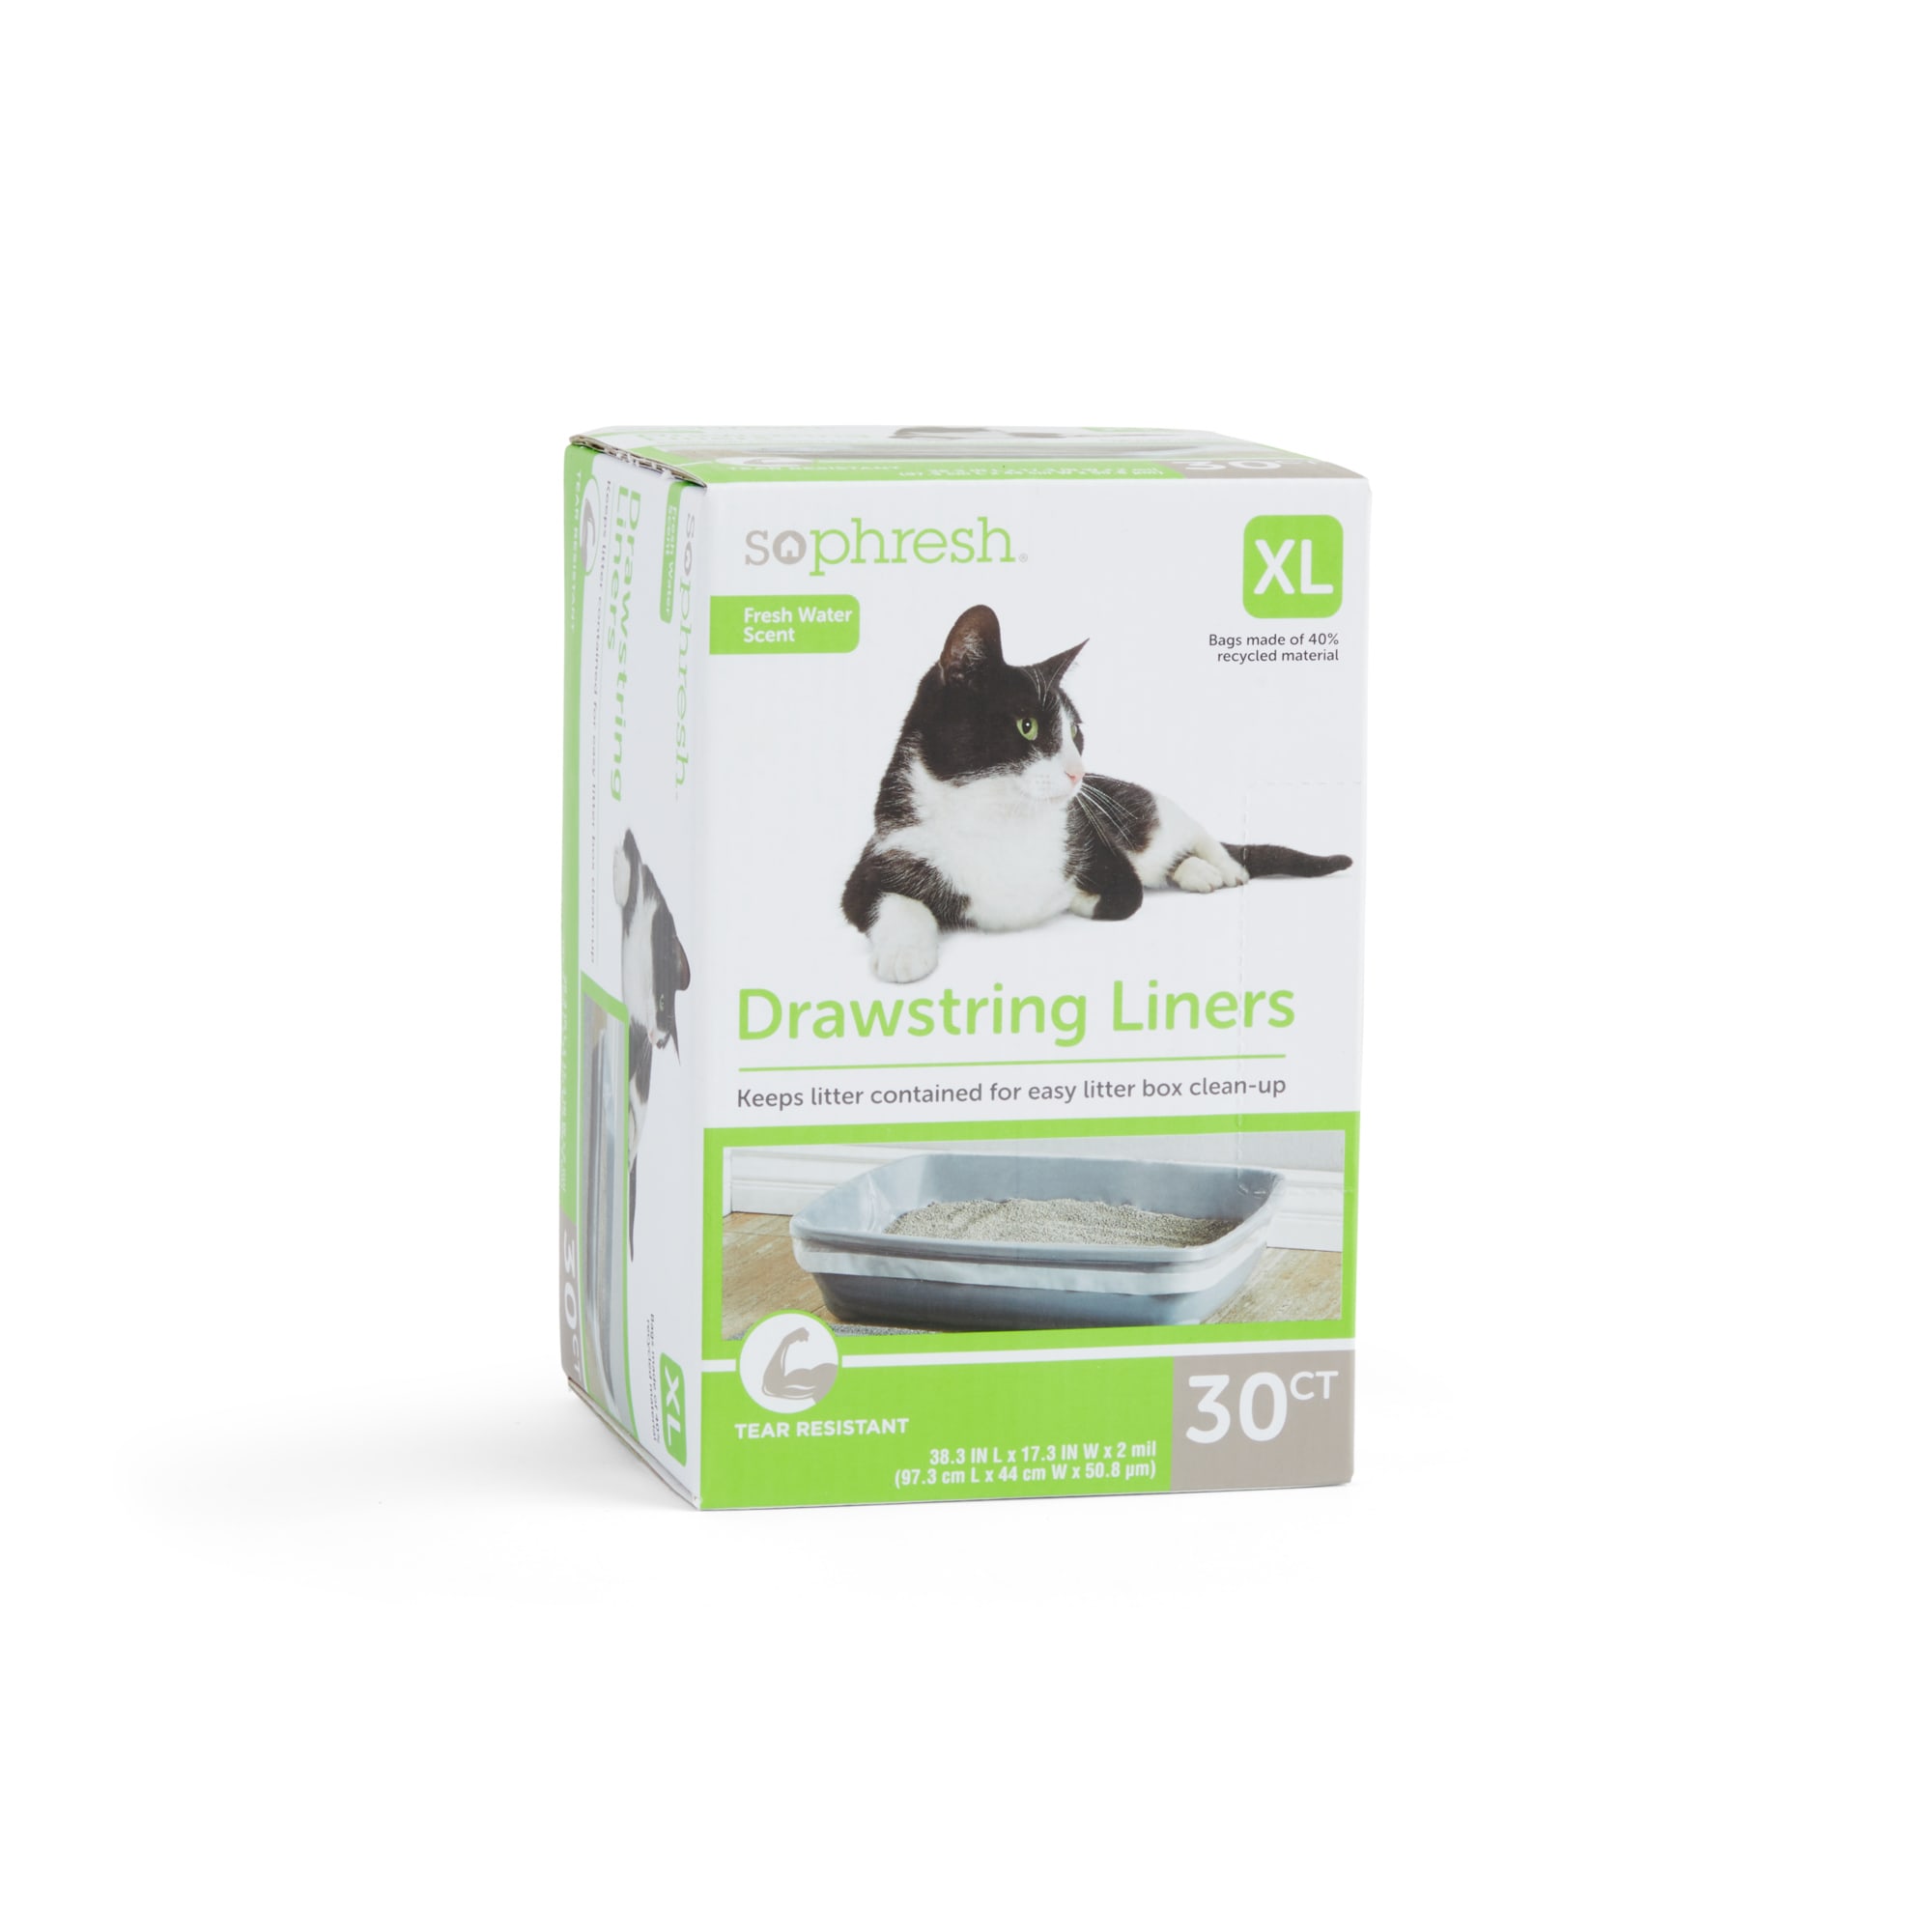 So Phresh Drawstring Liners with Fresh Water Scent Cat Litter Box, 38.3